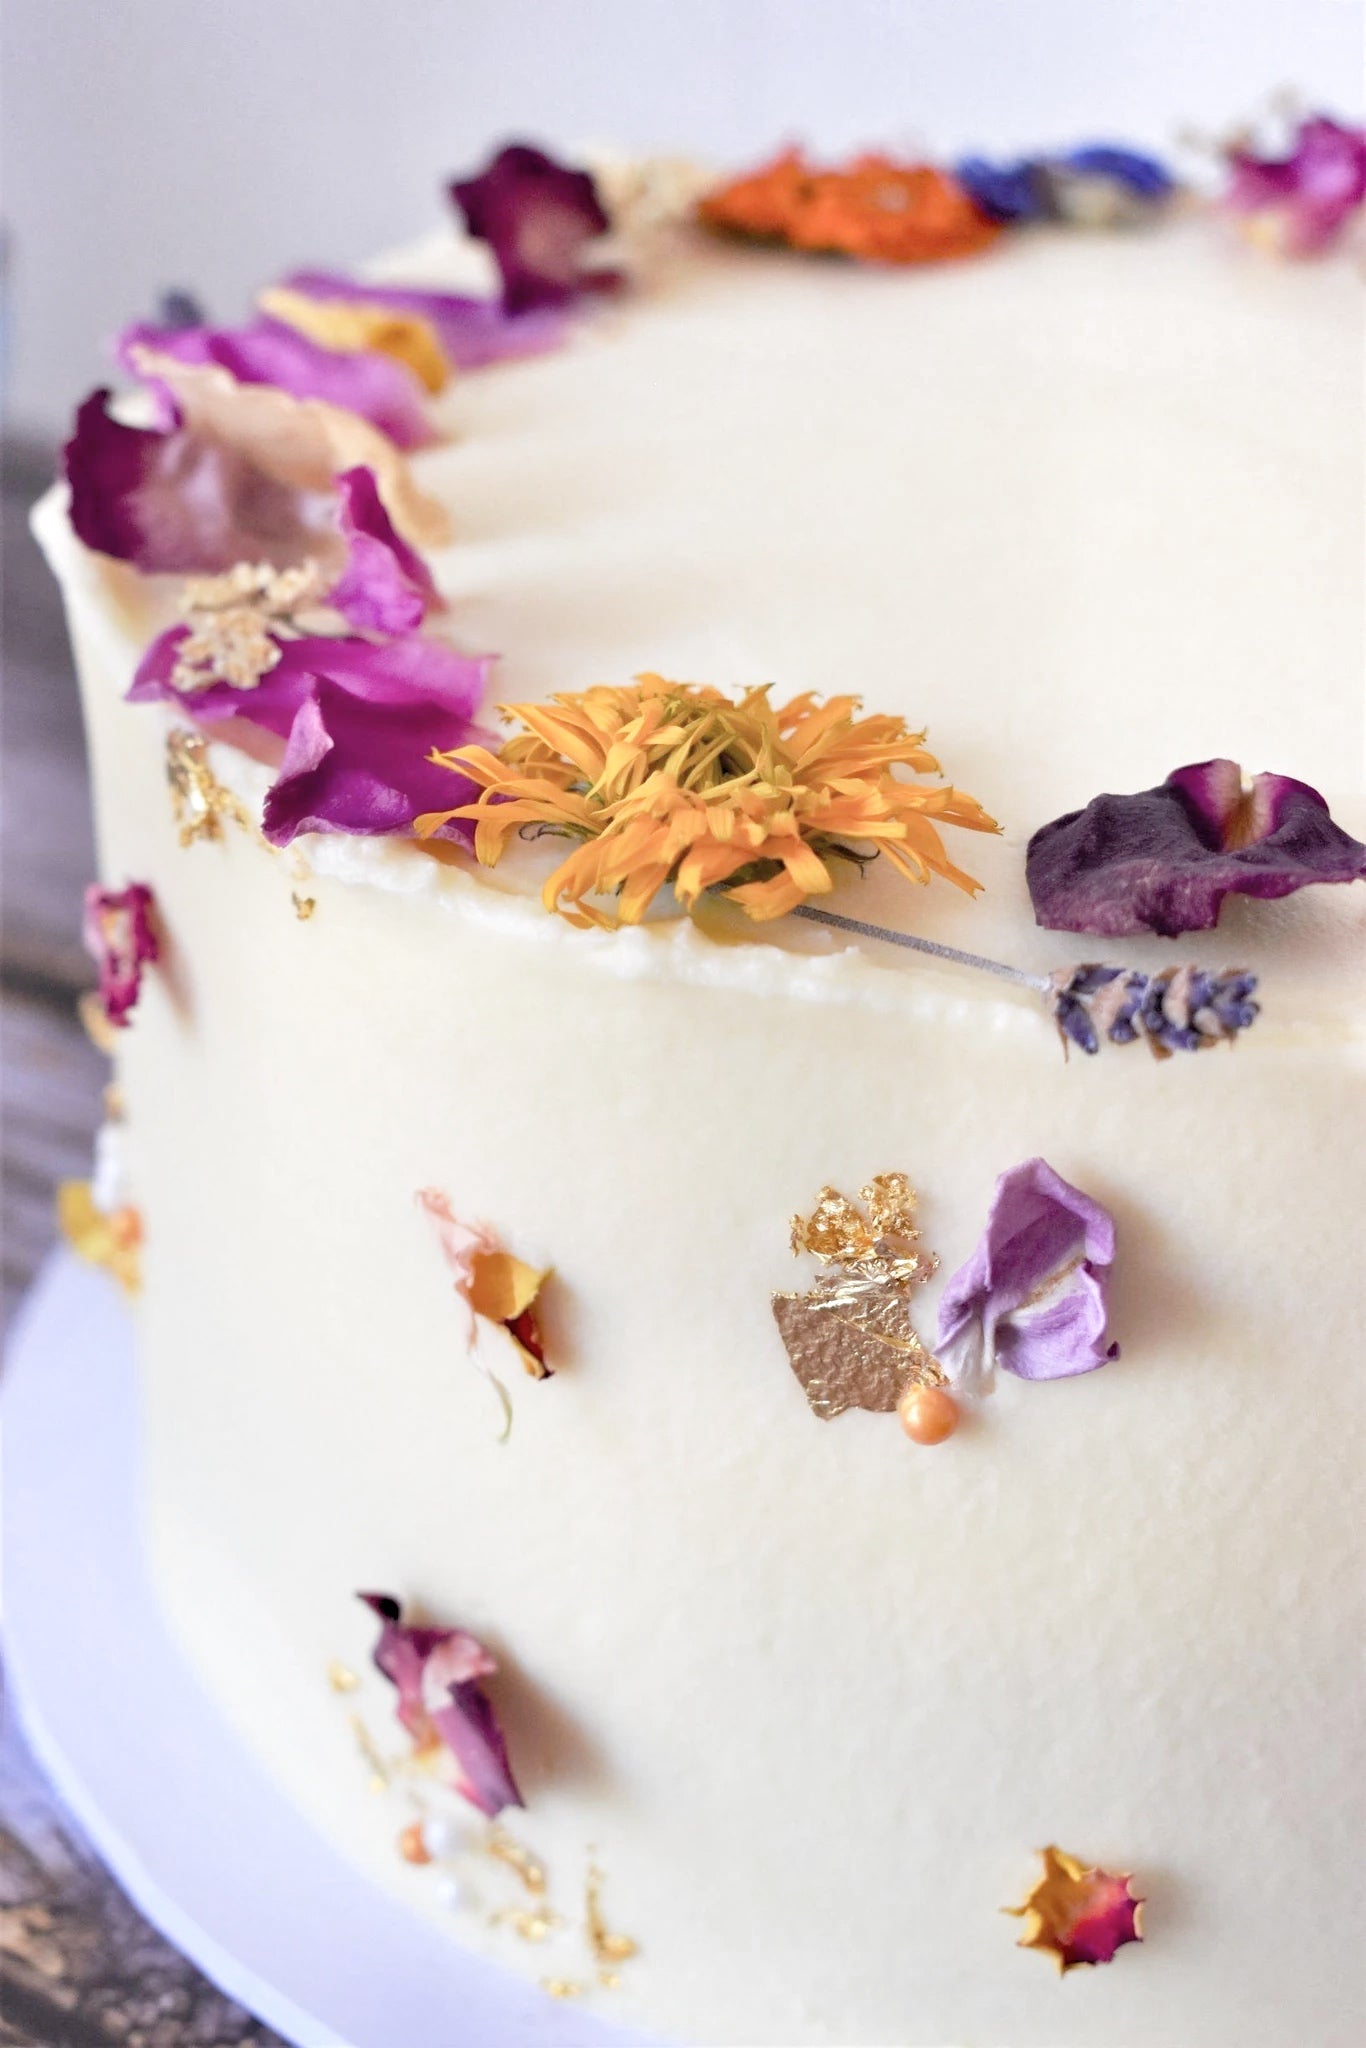 Clever Crumb Vintage Floral DIY Cake Kit, Locally Sourced Edible Dried Flowers, Gold Leaf, Cachous Sprinkles, Flower Cake, Vintage Cake, Floral Cake, High Tea Cake, Afternoon Tea Cake